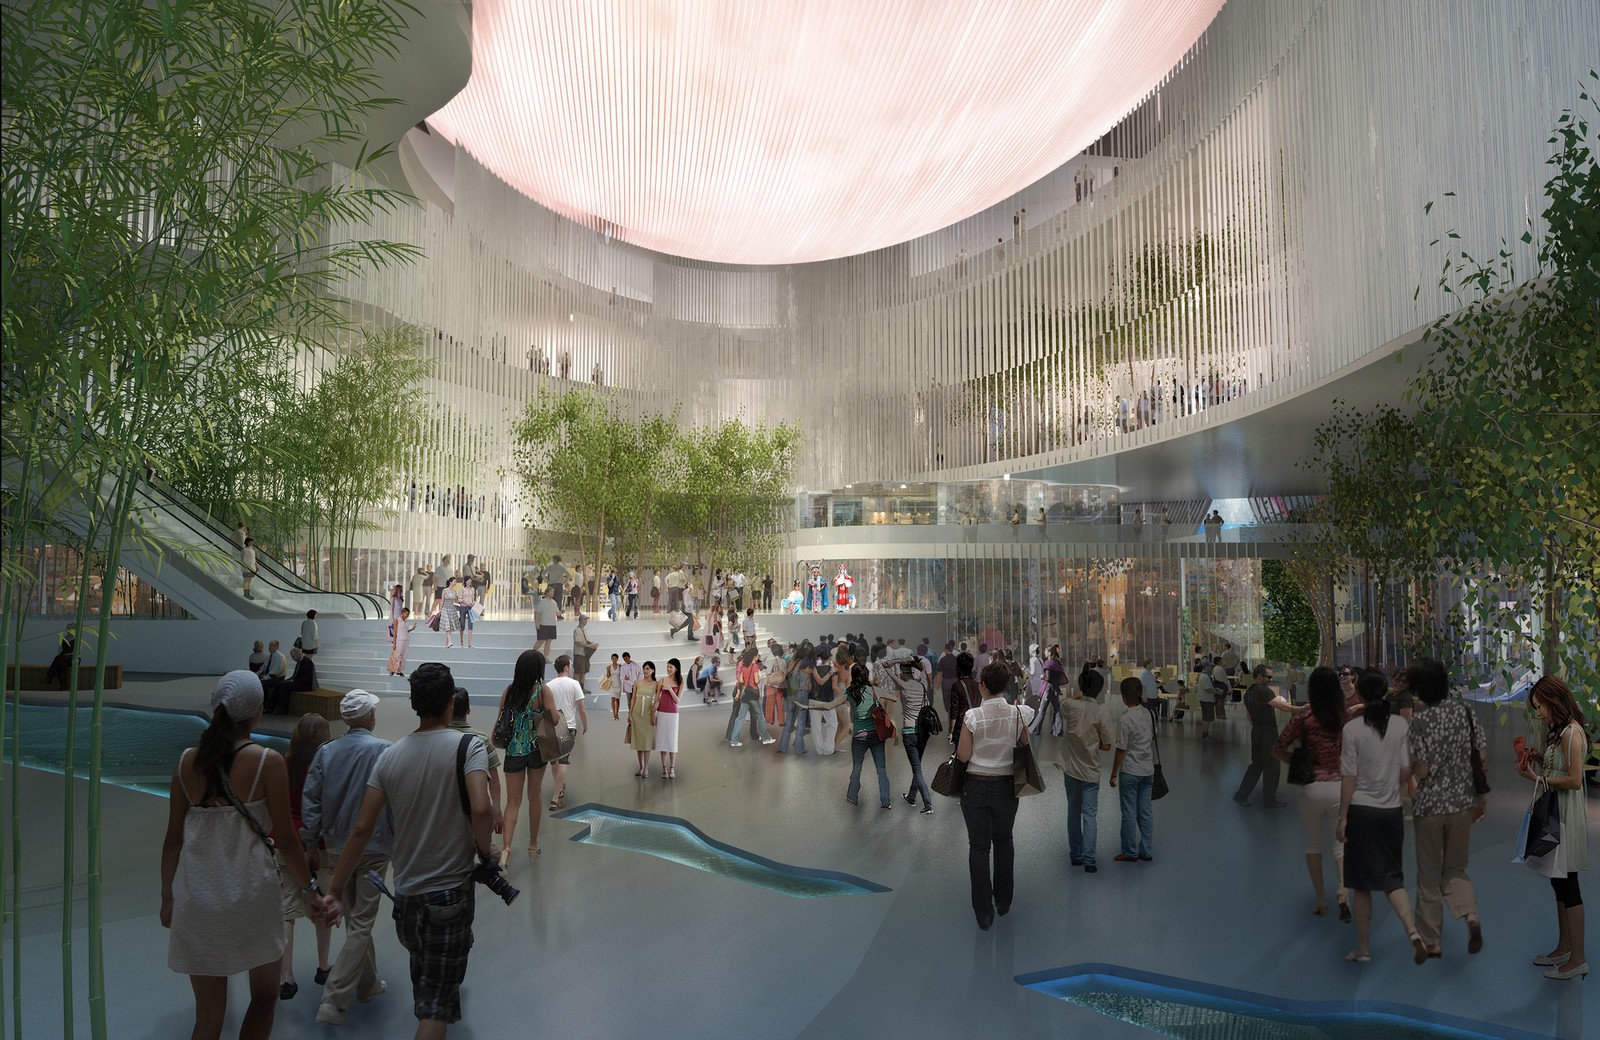 The Xiqu Centre will be a world-class performance venue